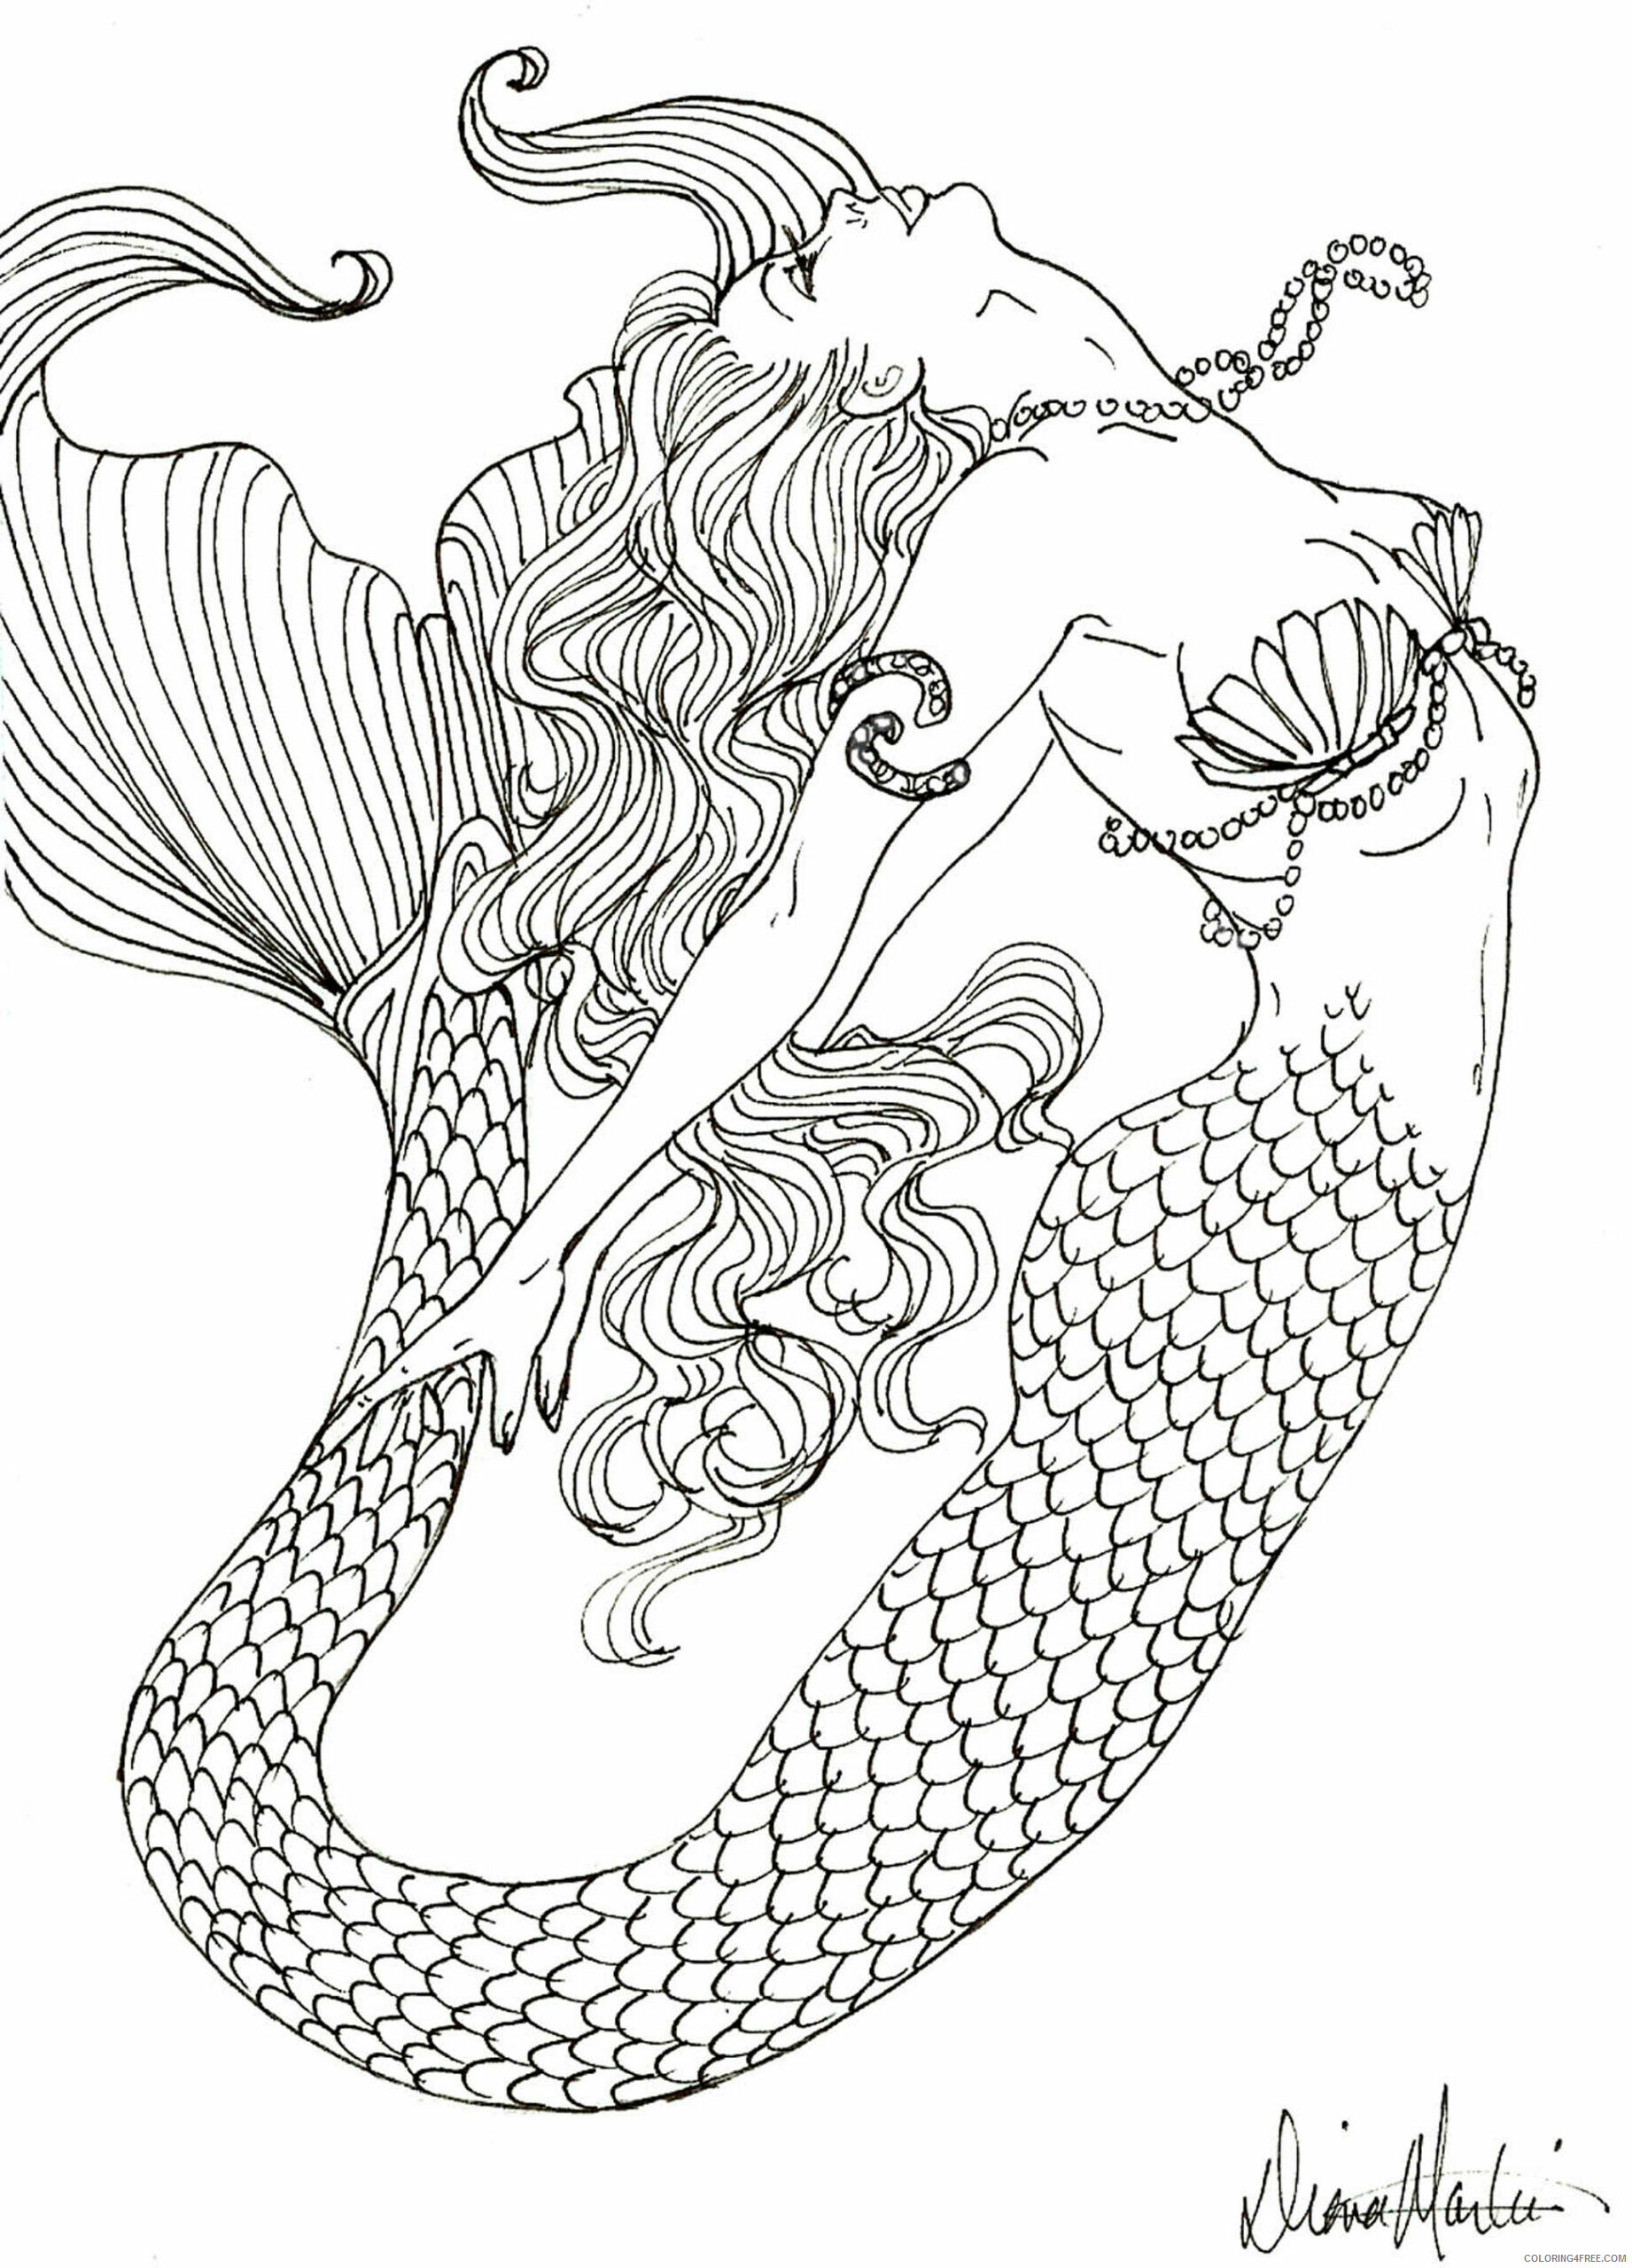 Zentangle Coloring Pages Realistic Mermaid Printable 2020 063 Coloring4free